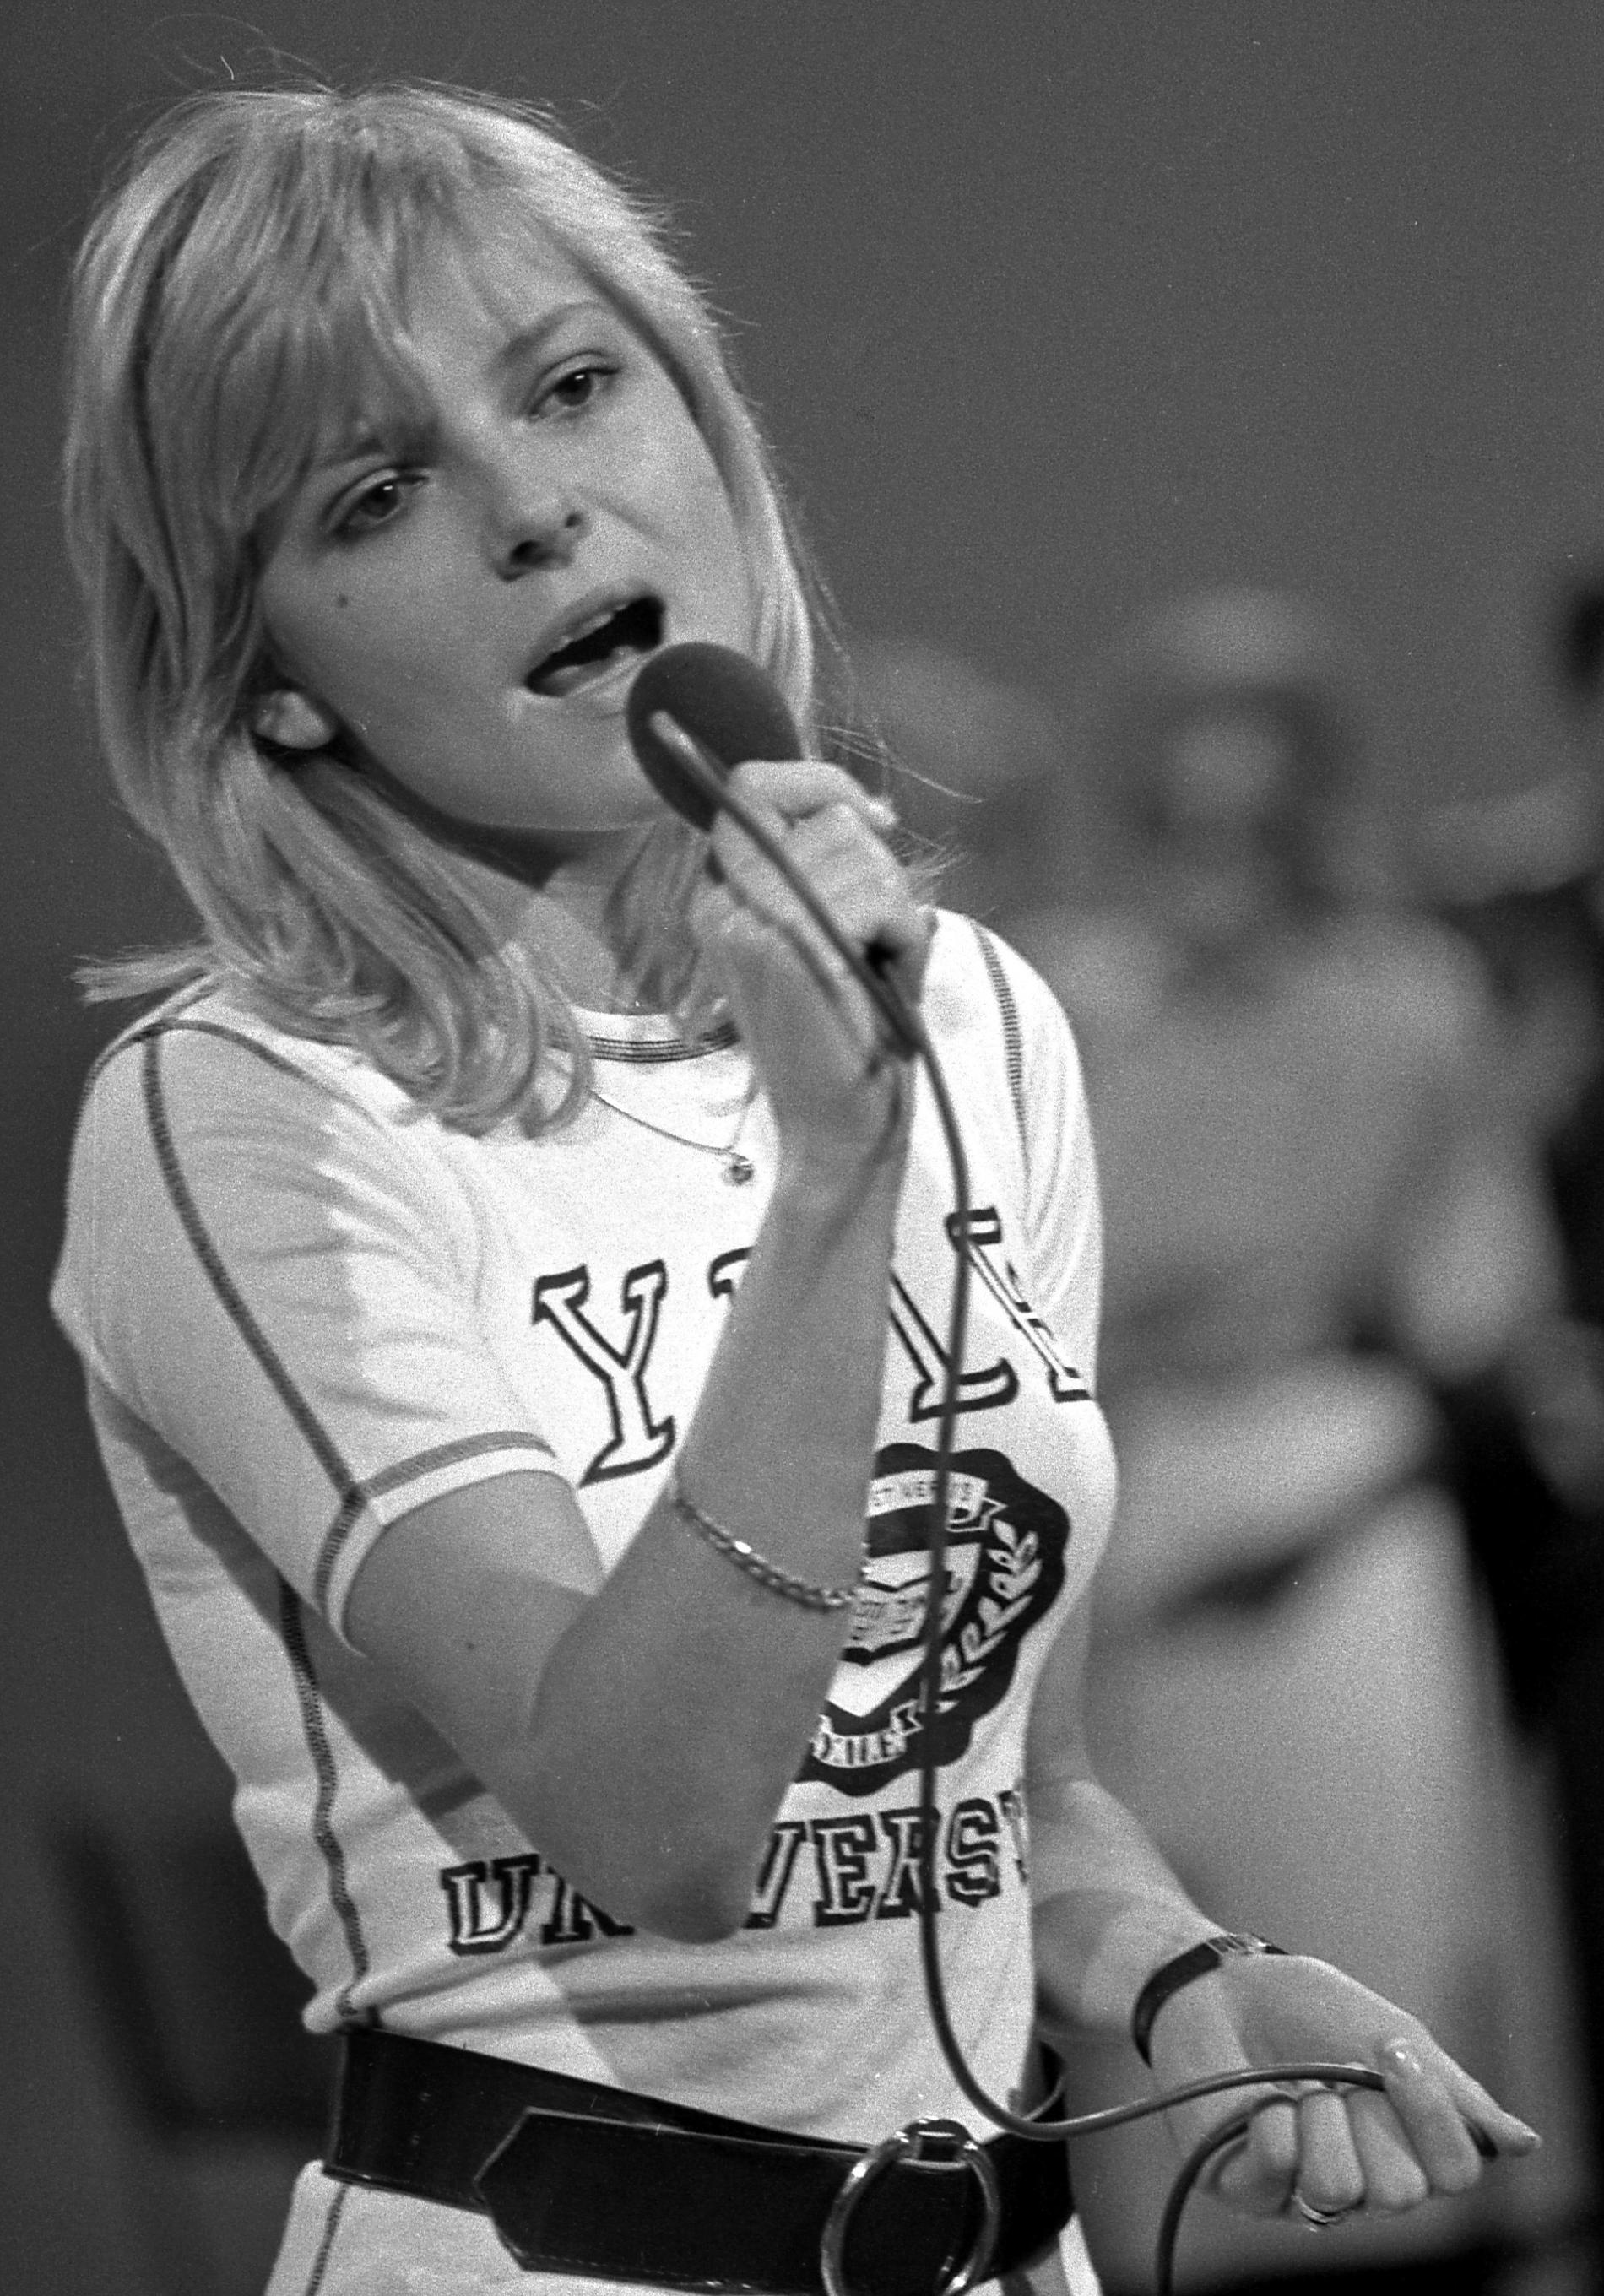 France Gall.